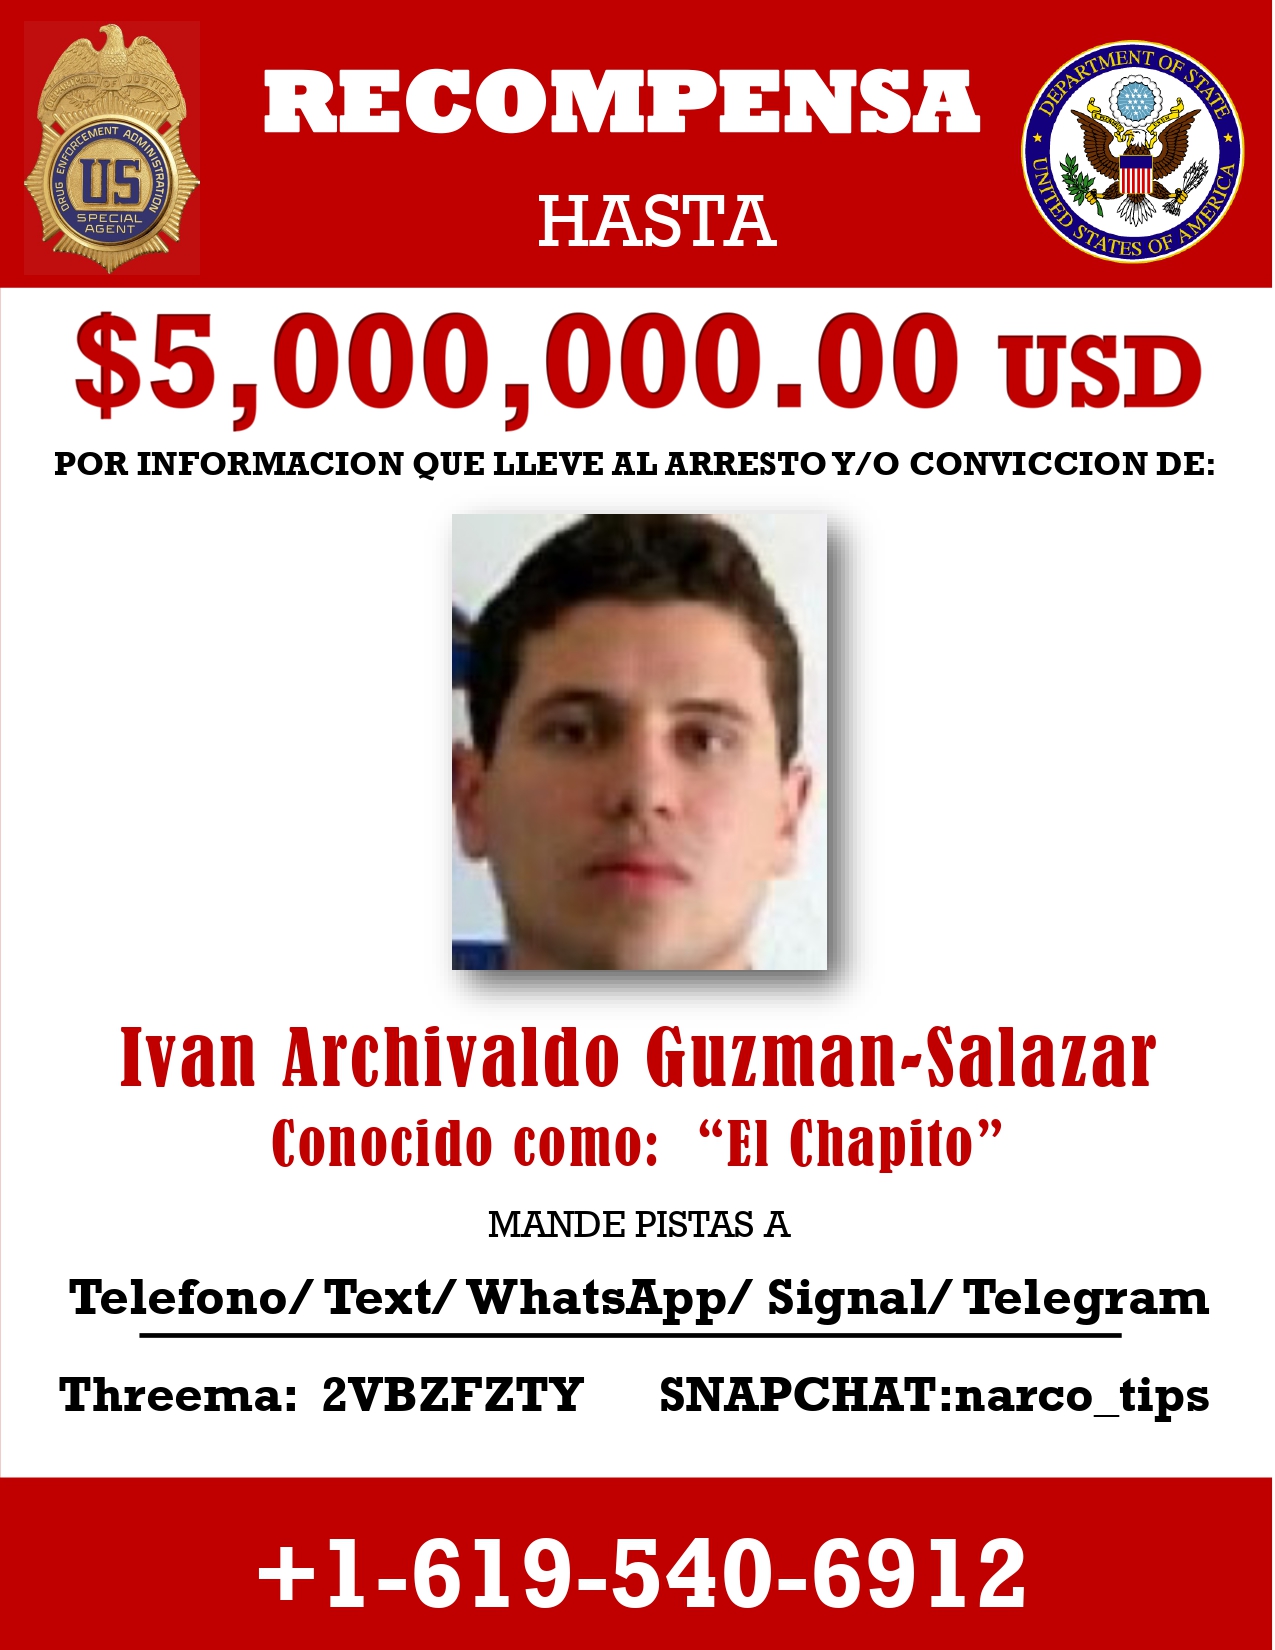 Iván Archivaldo Guzmán would be one of the relevant heads of the Sinaloa Cartel (Photo: US State Department)